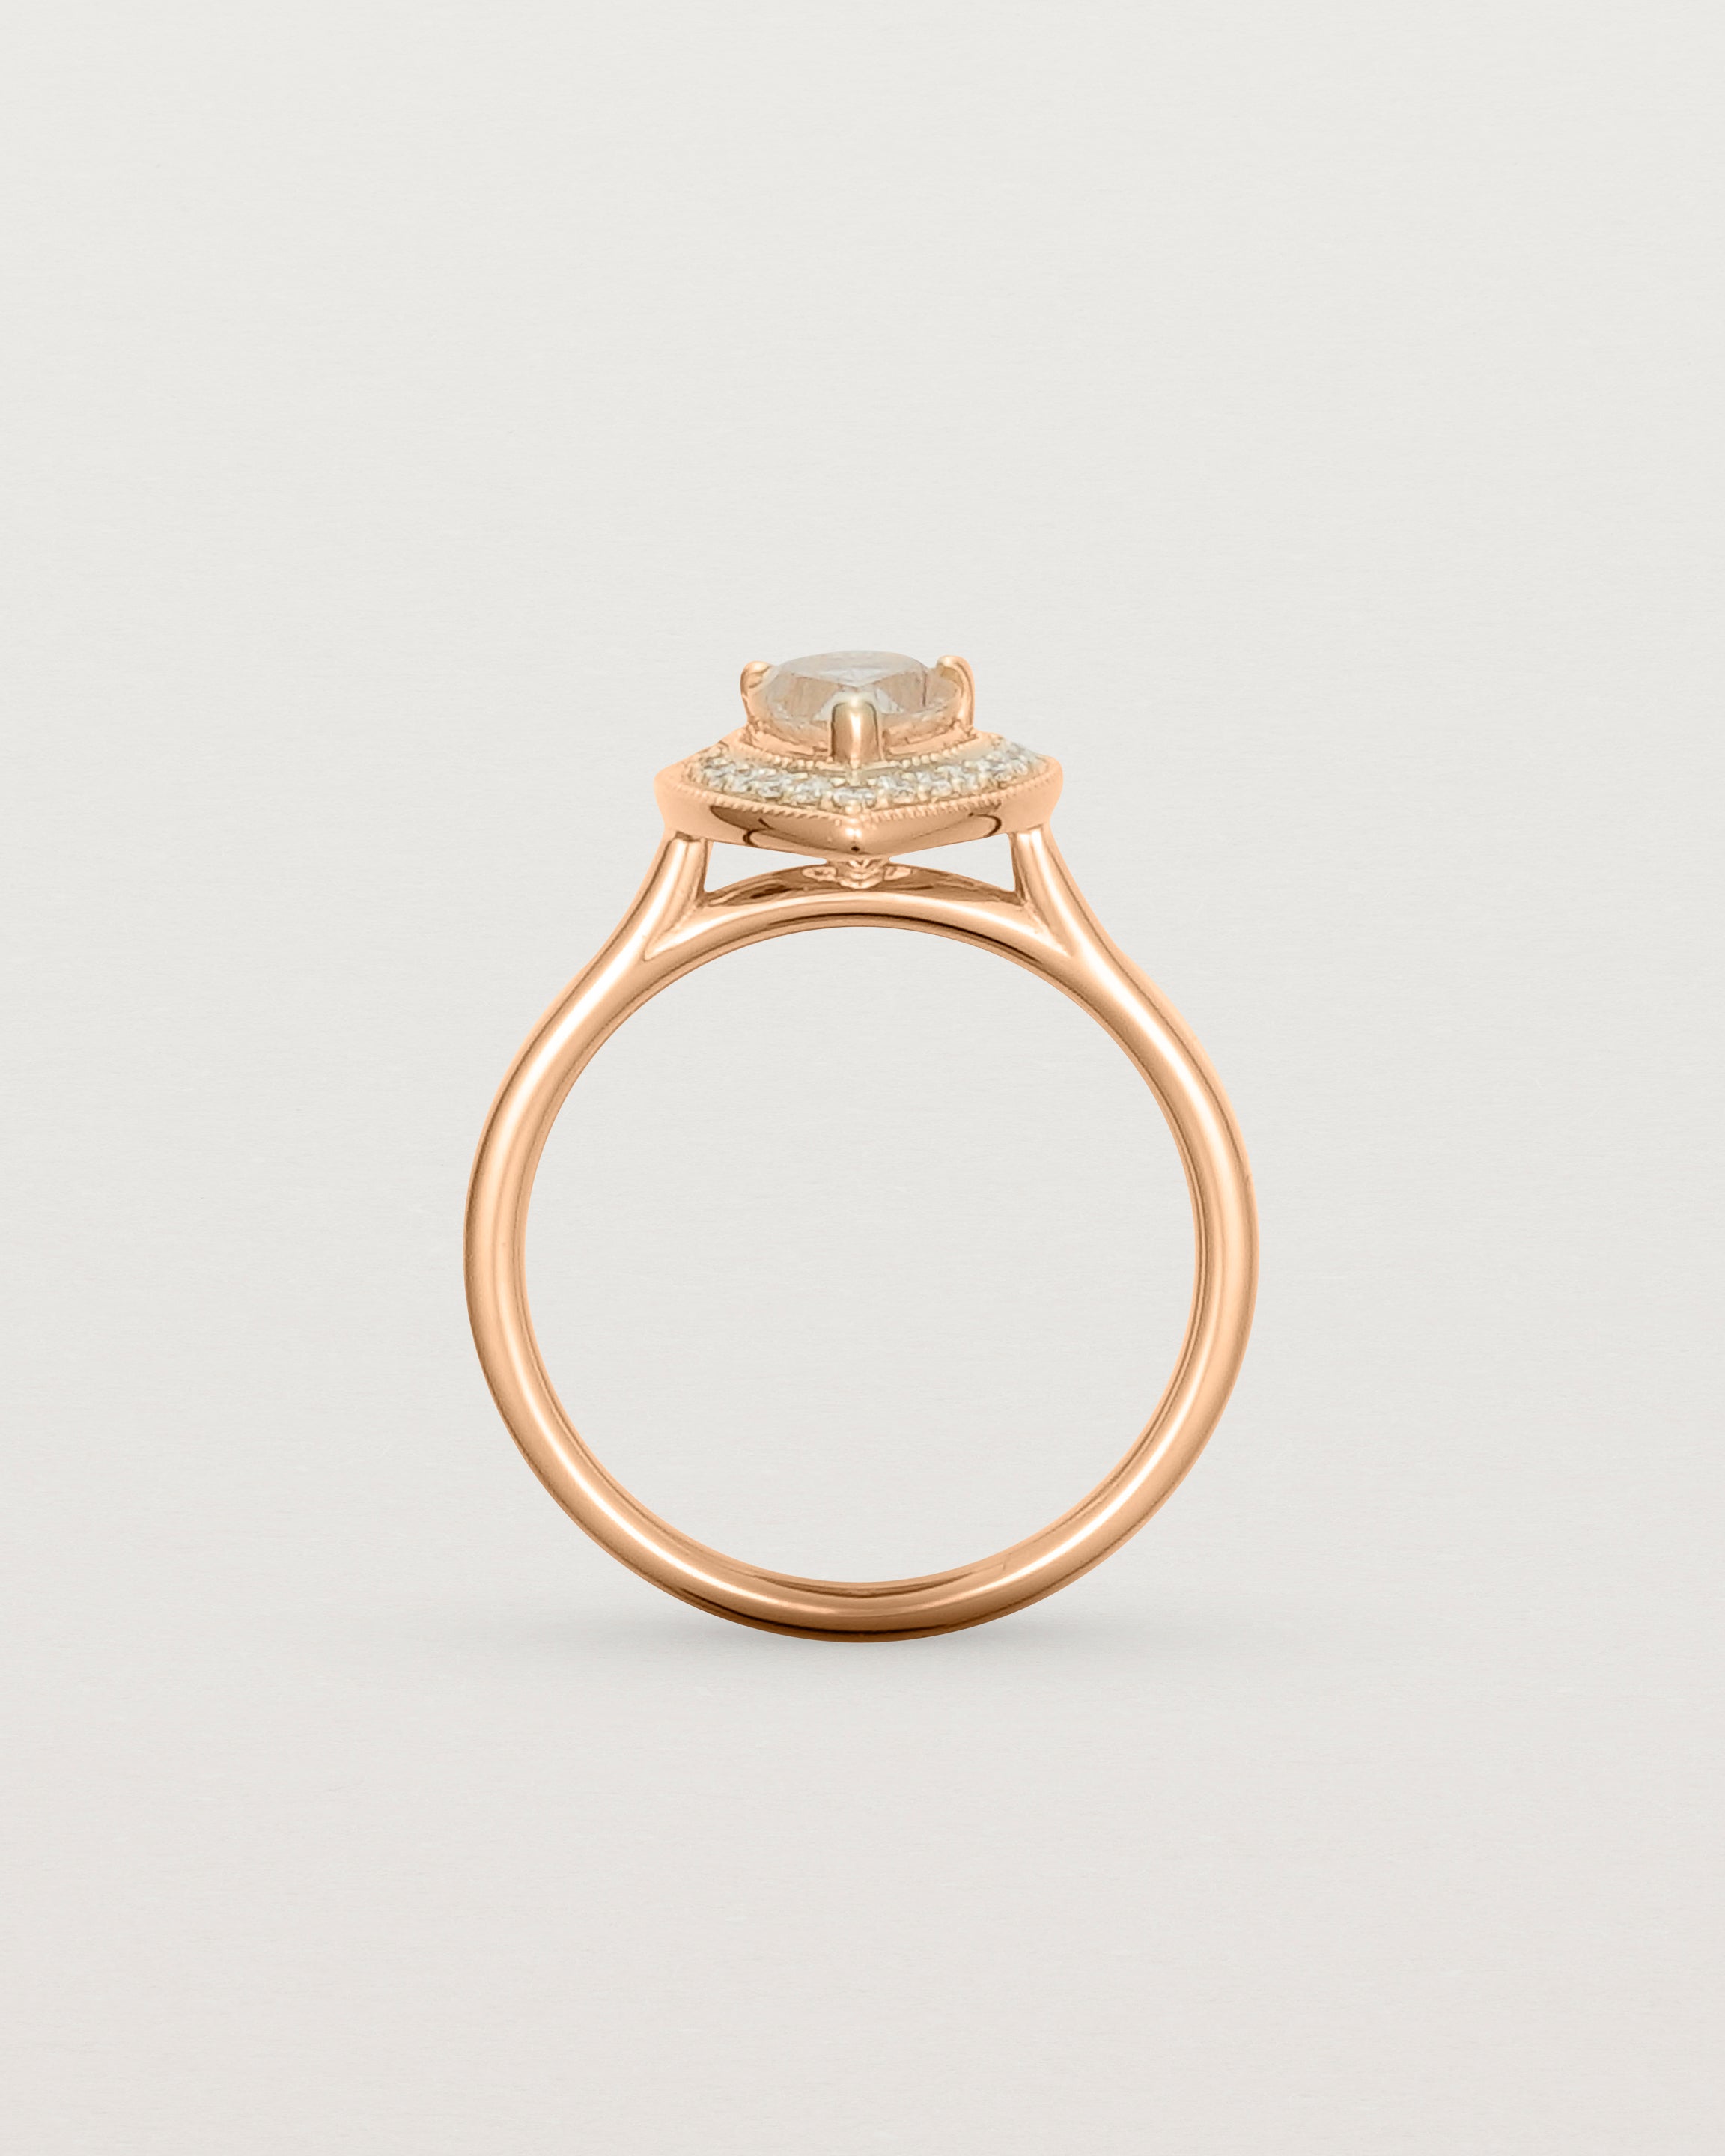 Standing view pear halo ring featuring a pear cut rutilated quartz stone and a halo of white diamonds in rose gold